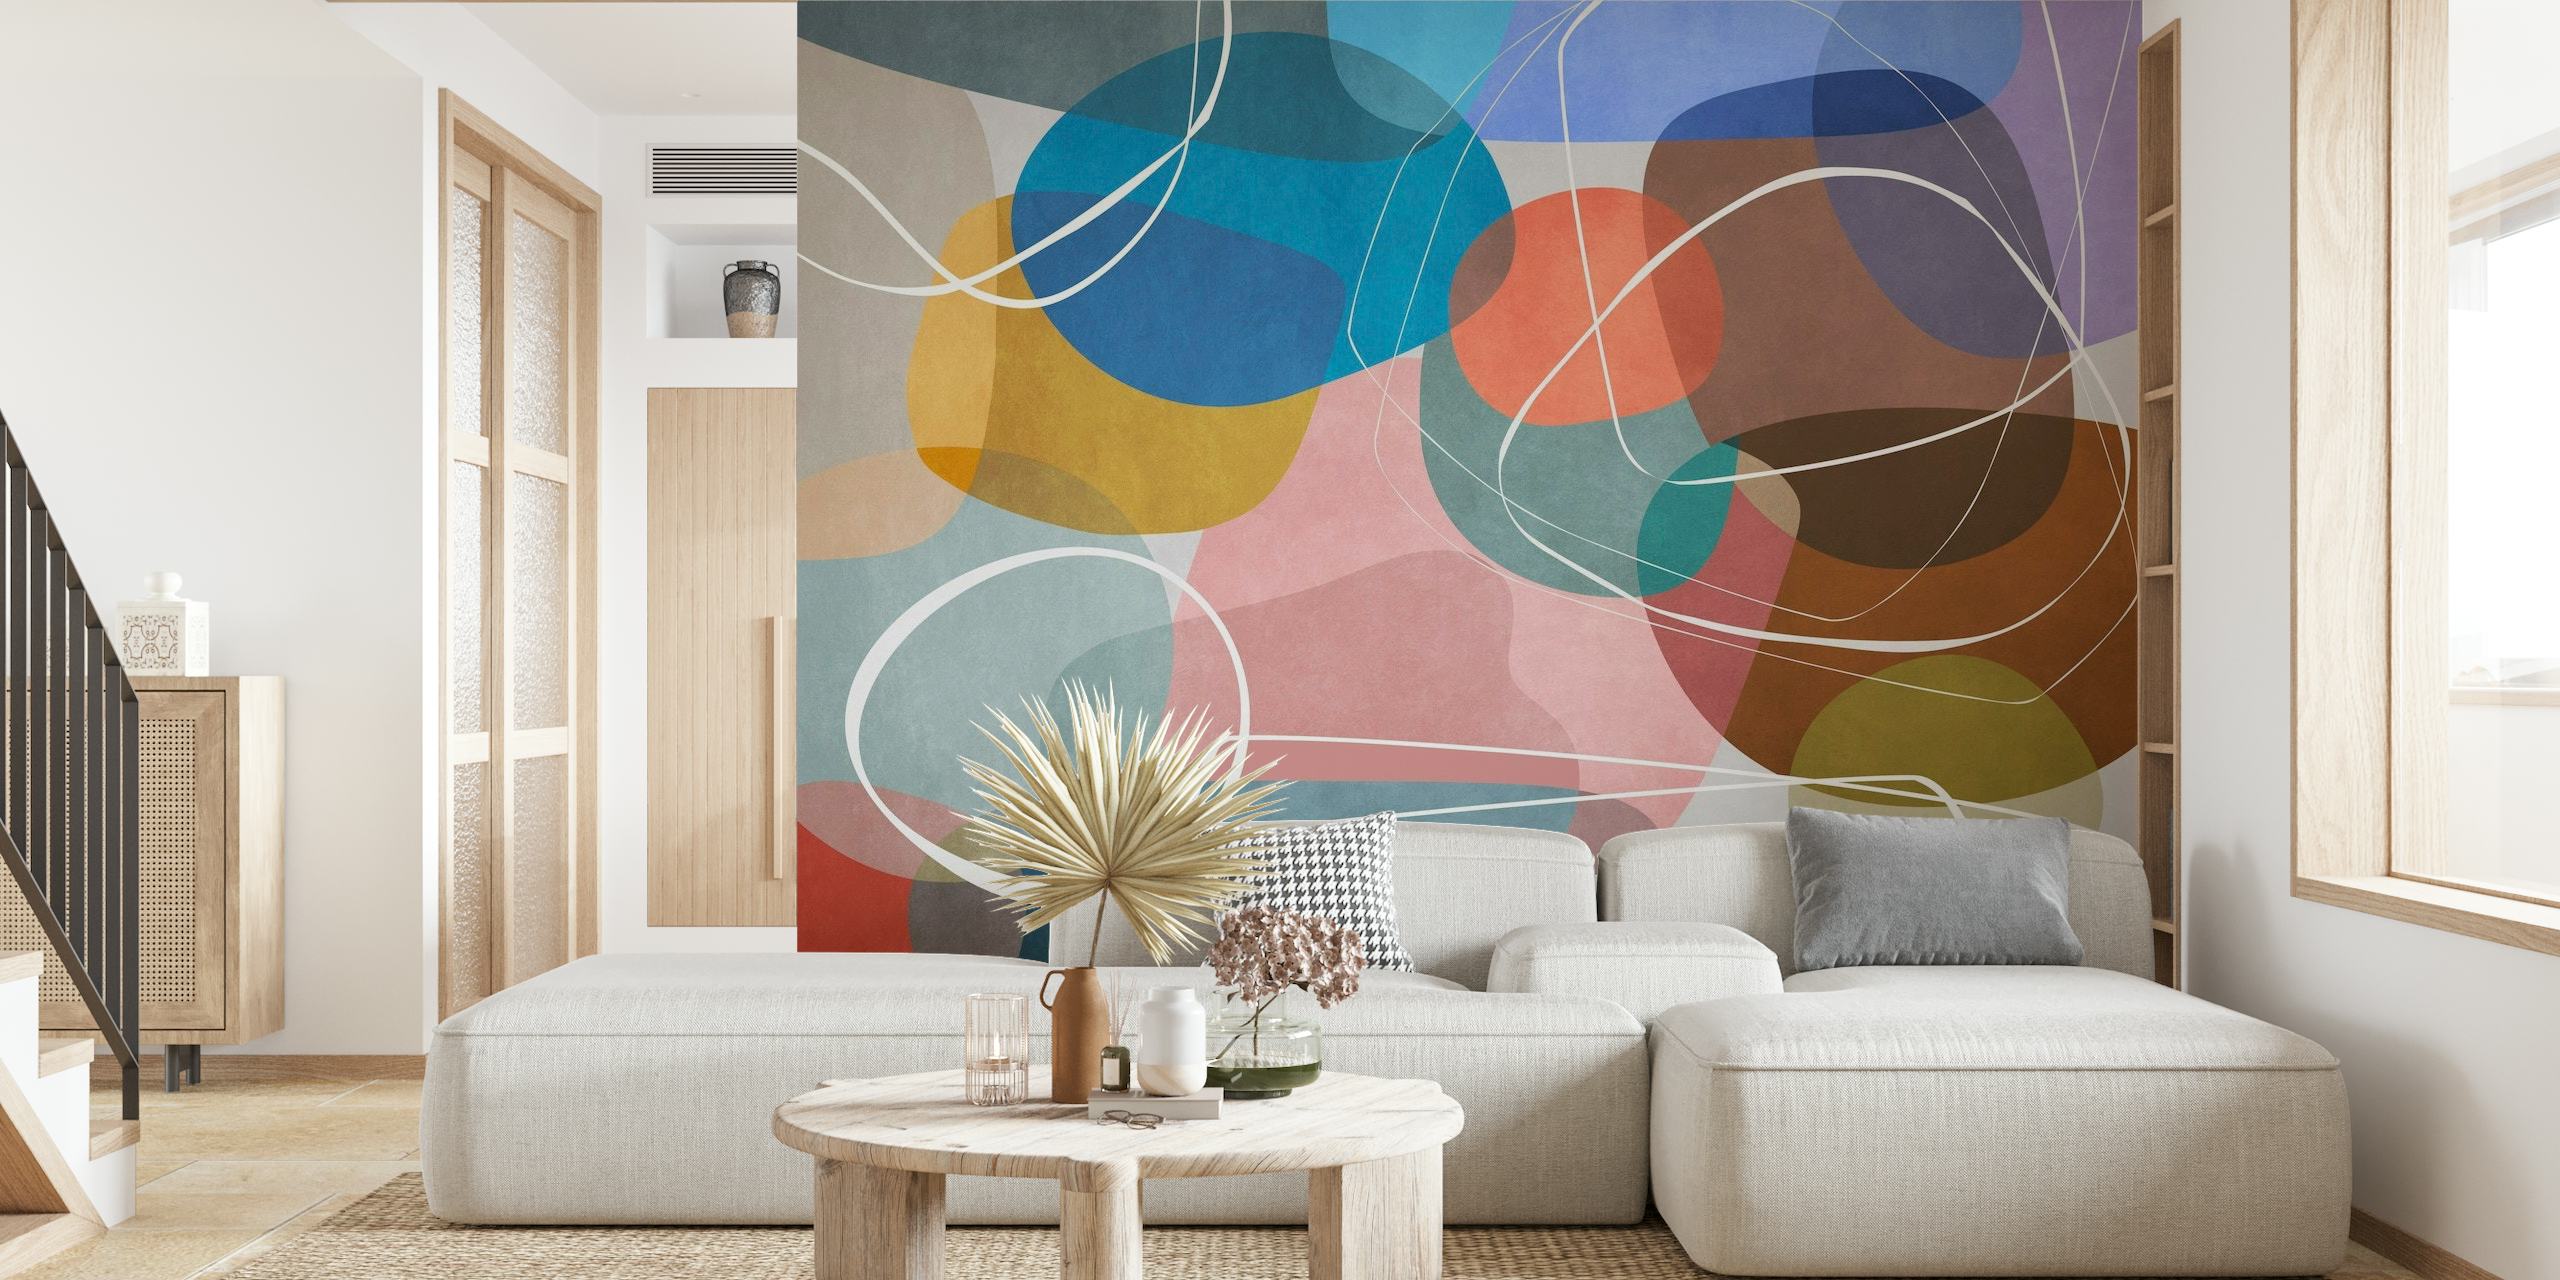 Abstract geometric shapes wall mural with overlapping circles and lines in various colors